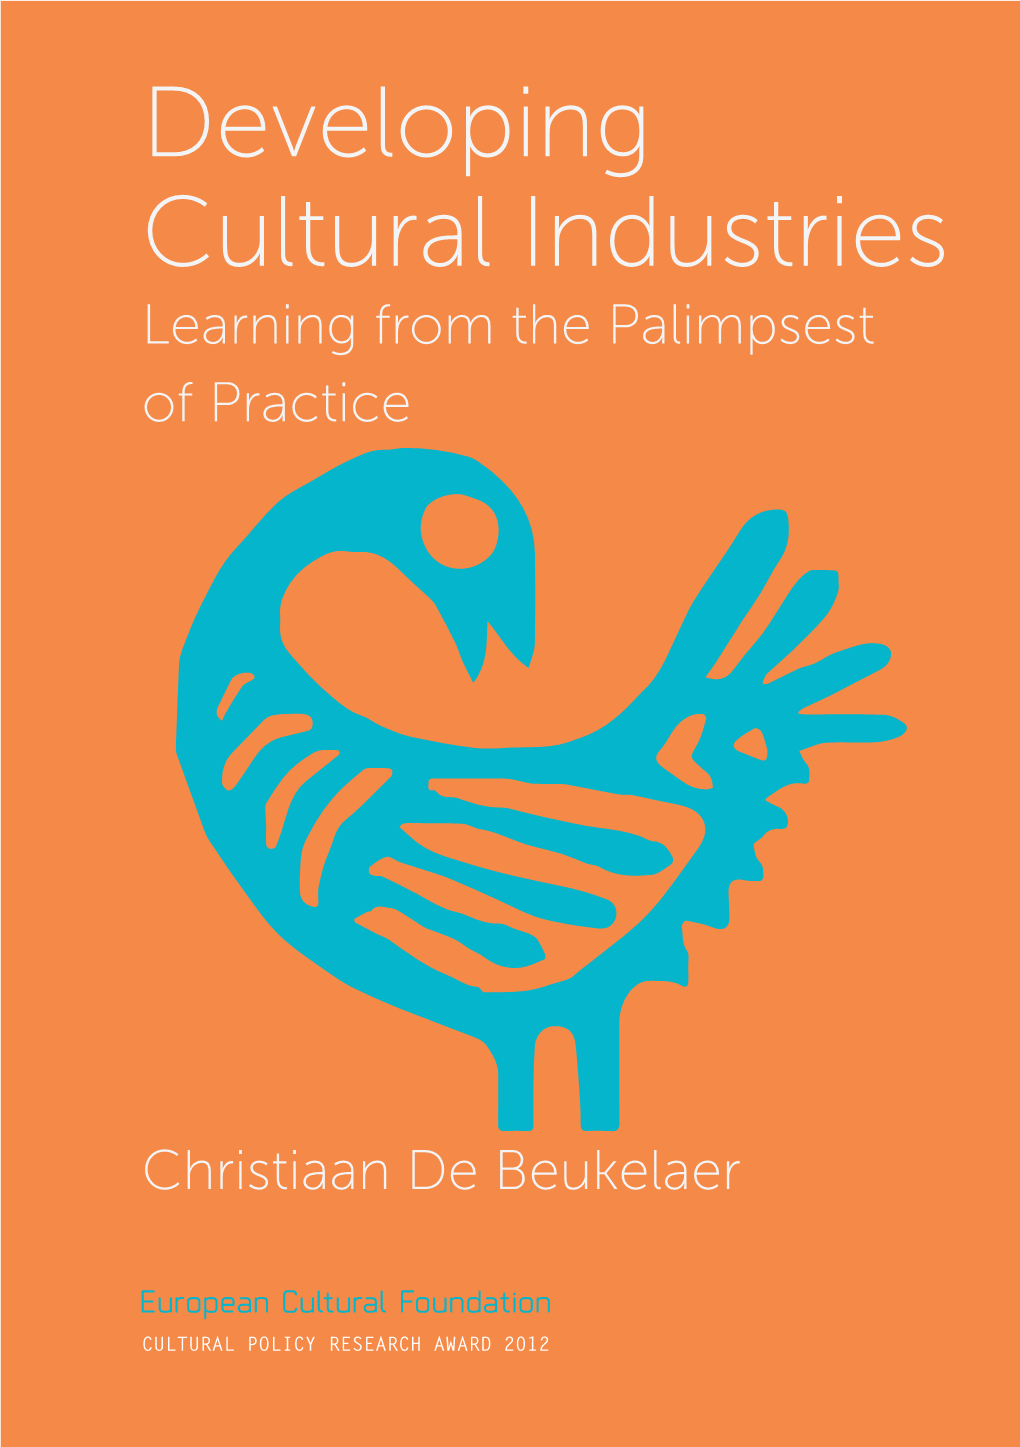 Developing Cultural Industries Learning from the Palimpsest of Practice